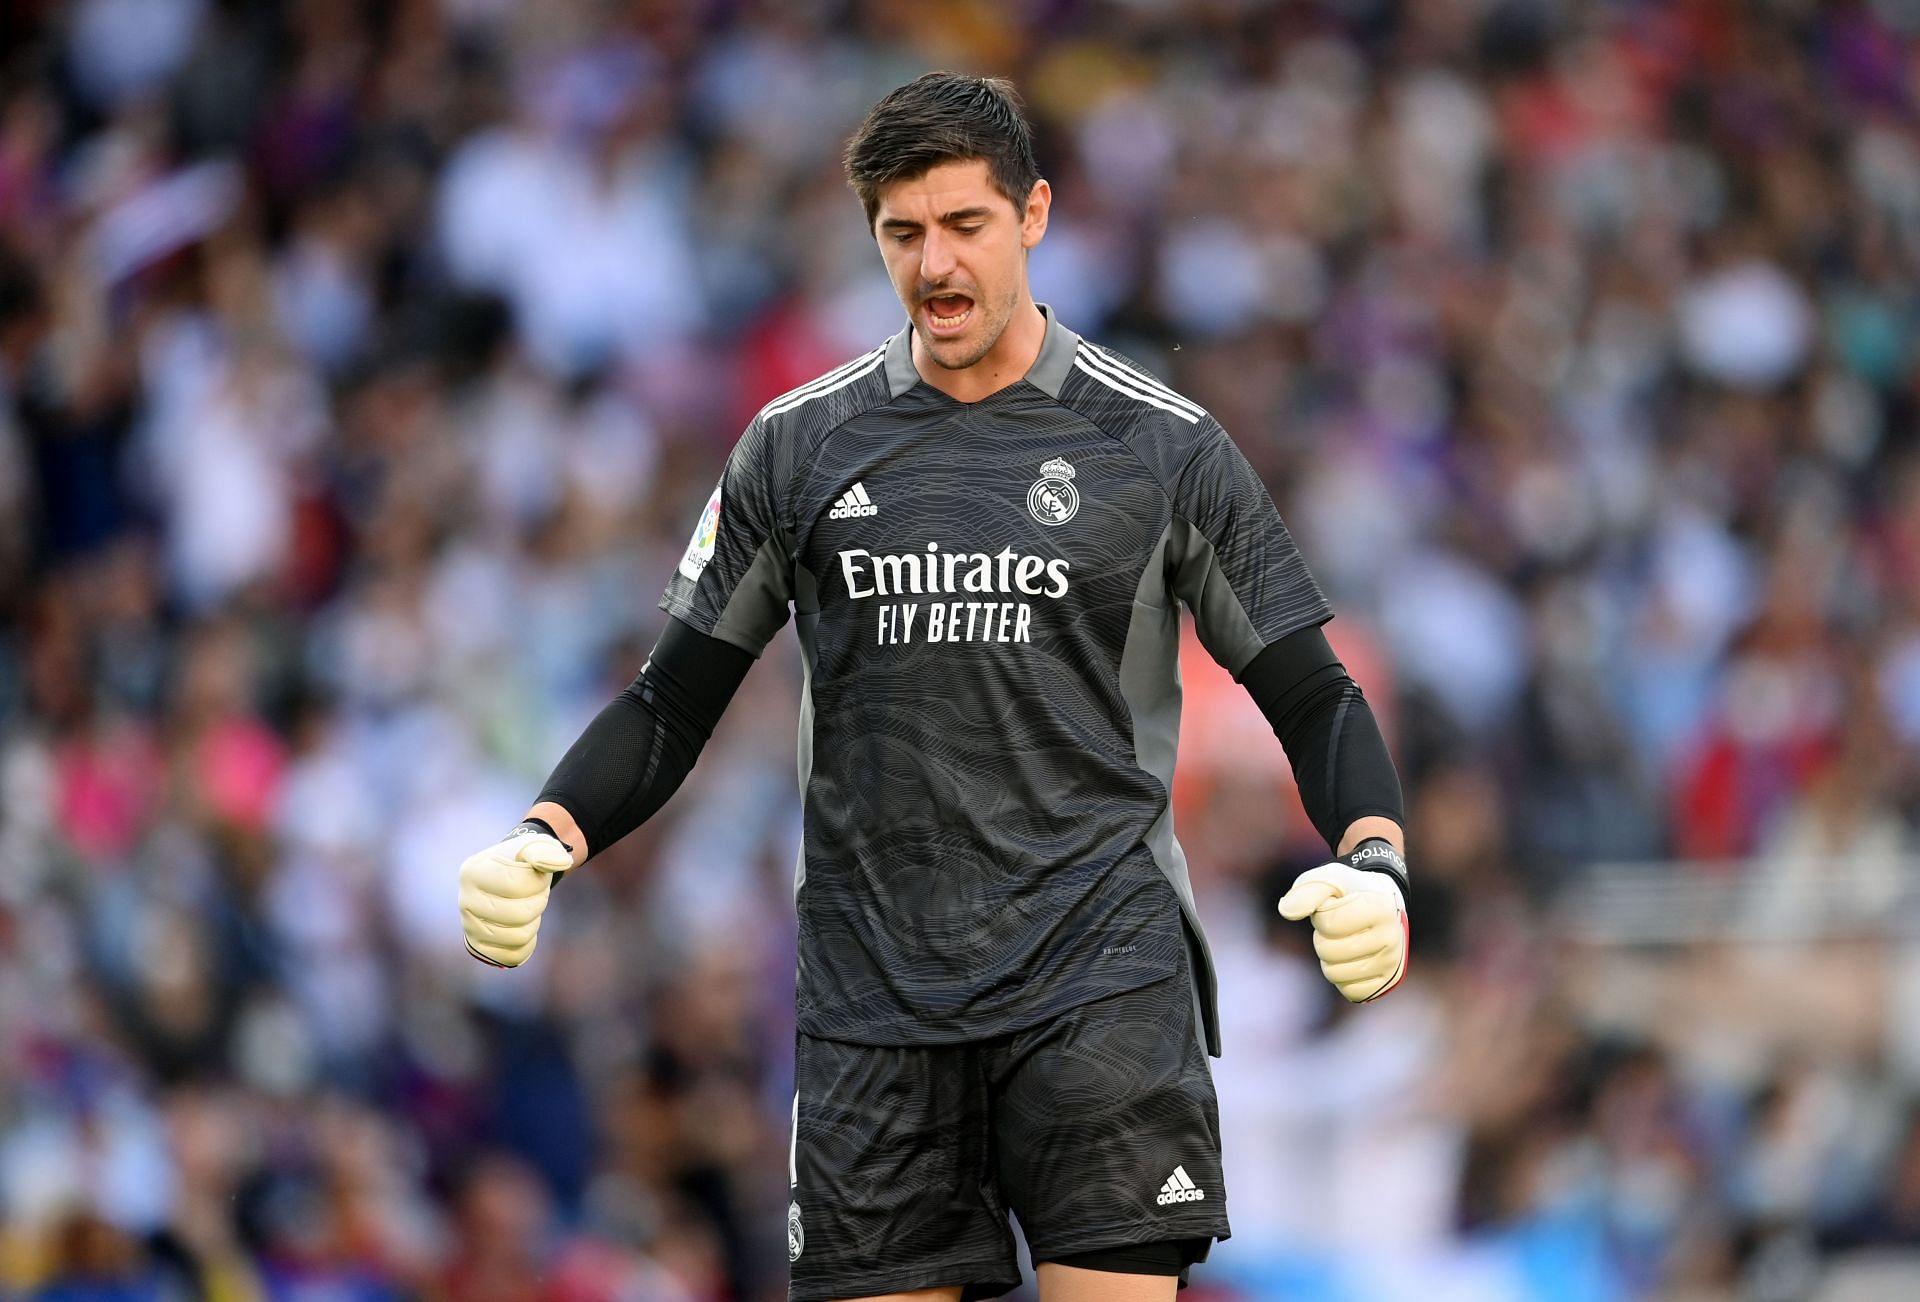 Thibaut Courtois has been in good form for Real Madrid this season.